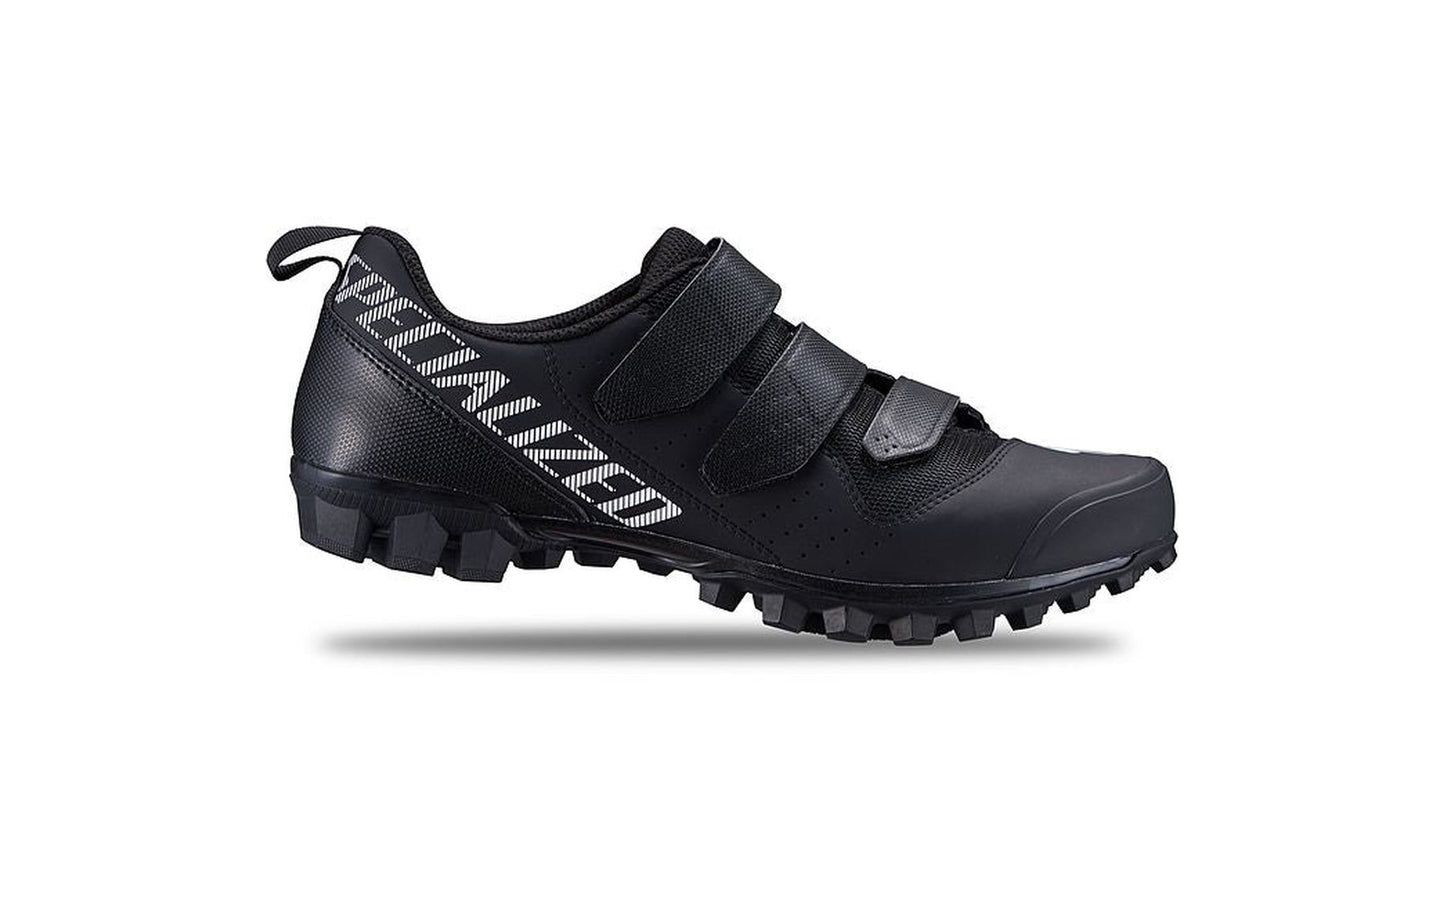 Recon 1.0 Mountain Bike Shoes-Specialized